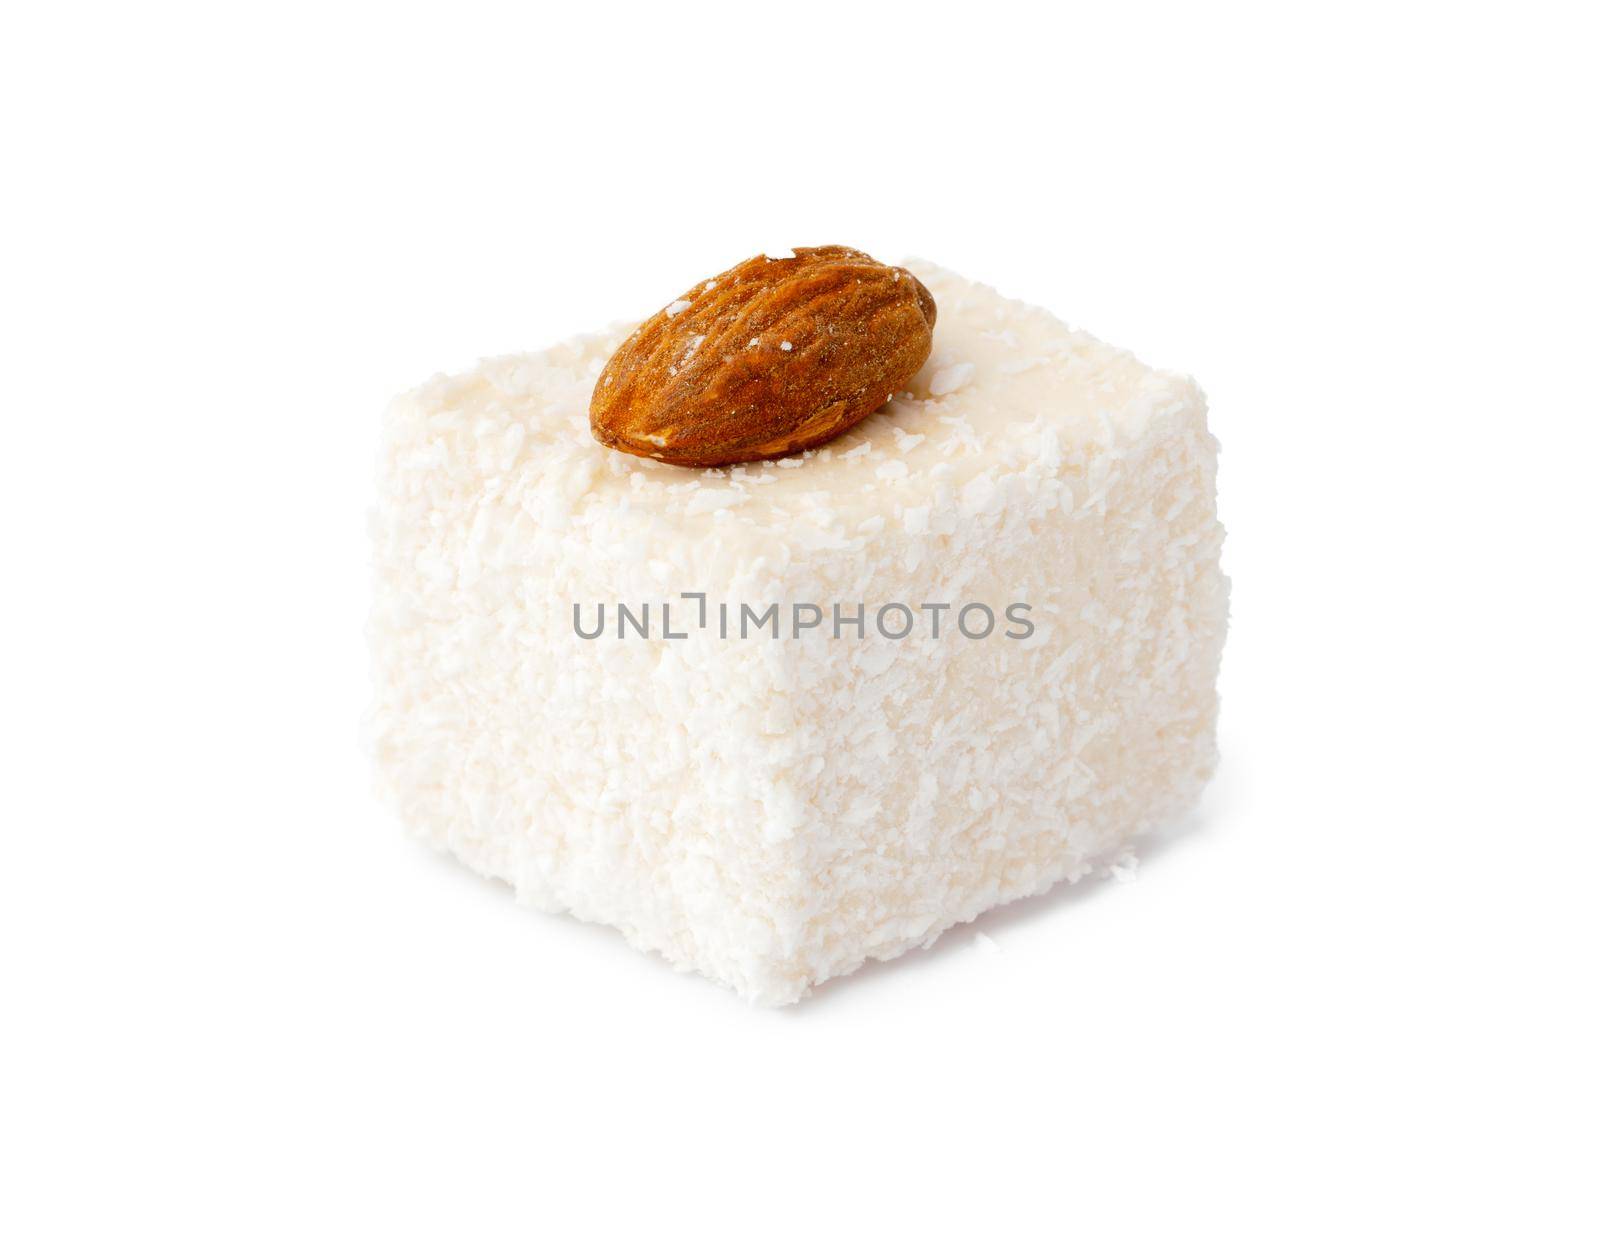 Turkish delight dessert isolated on white background, close up